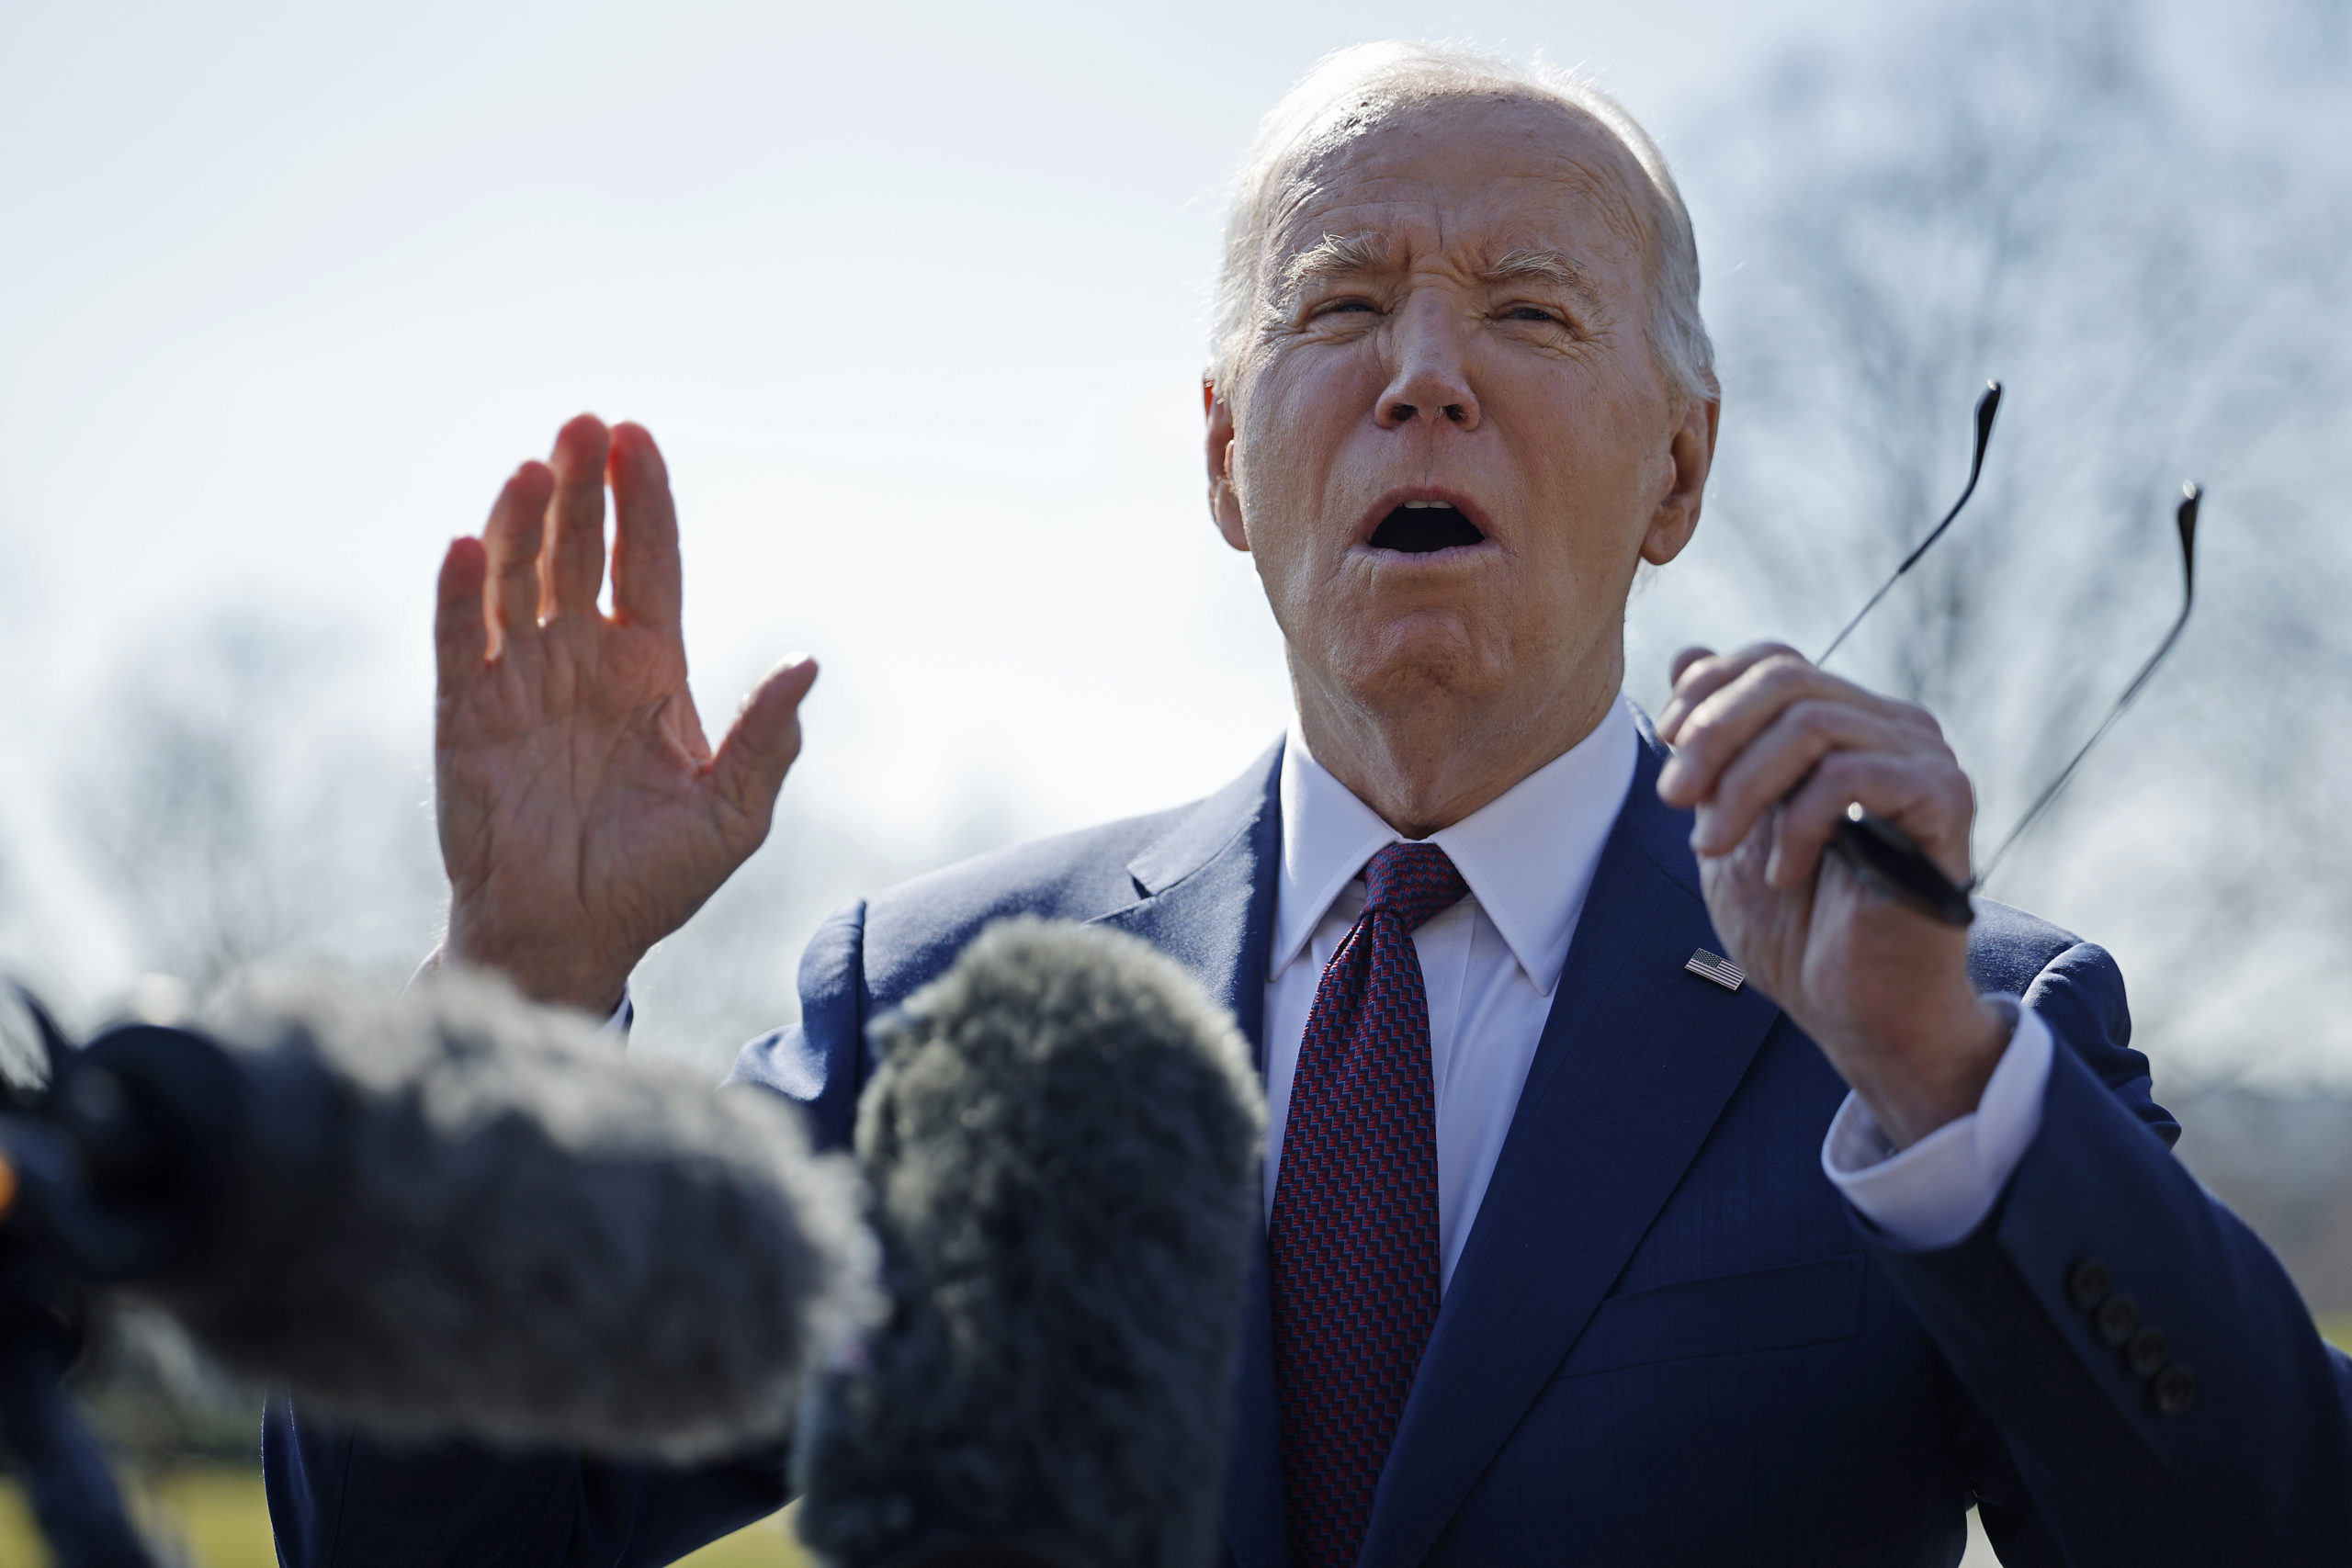 WASHINGTON, DC - FEBRUARY 20: U.S. President Joe Biden stops to talk to journalists about new Russian sanctions as he departs the White House on February 20, 2024 in Washington, DC. Biden is traveling to California to attend campaign receptions across the state. (Photo by Chip Somodevilla/Getty Images)